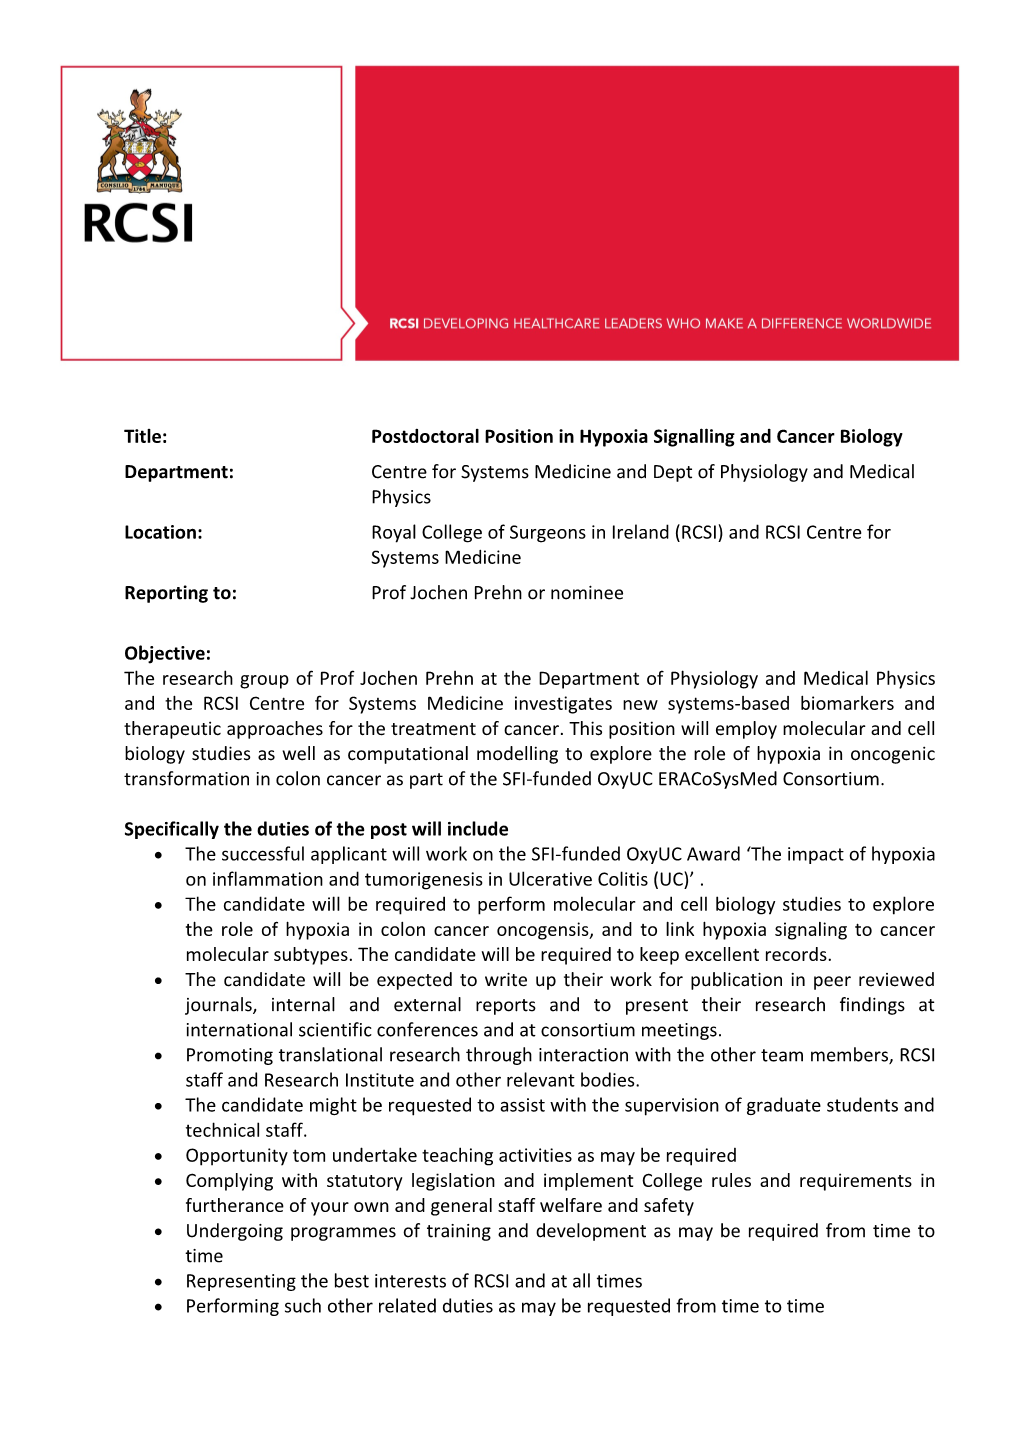 Title:Postdoctoral Position in Hypoxia Signalling and Cancer Biology